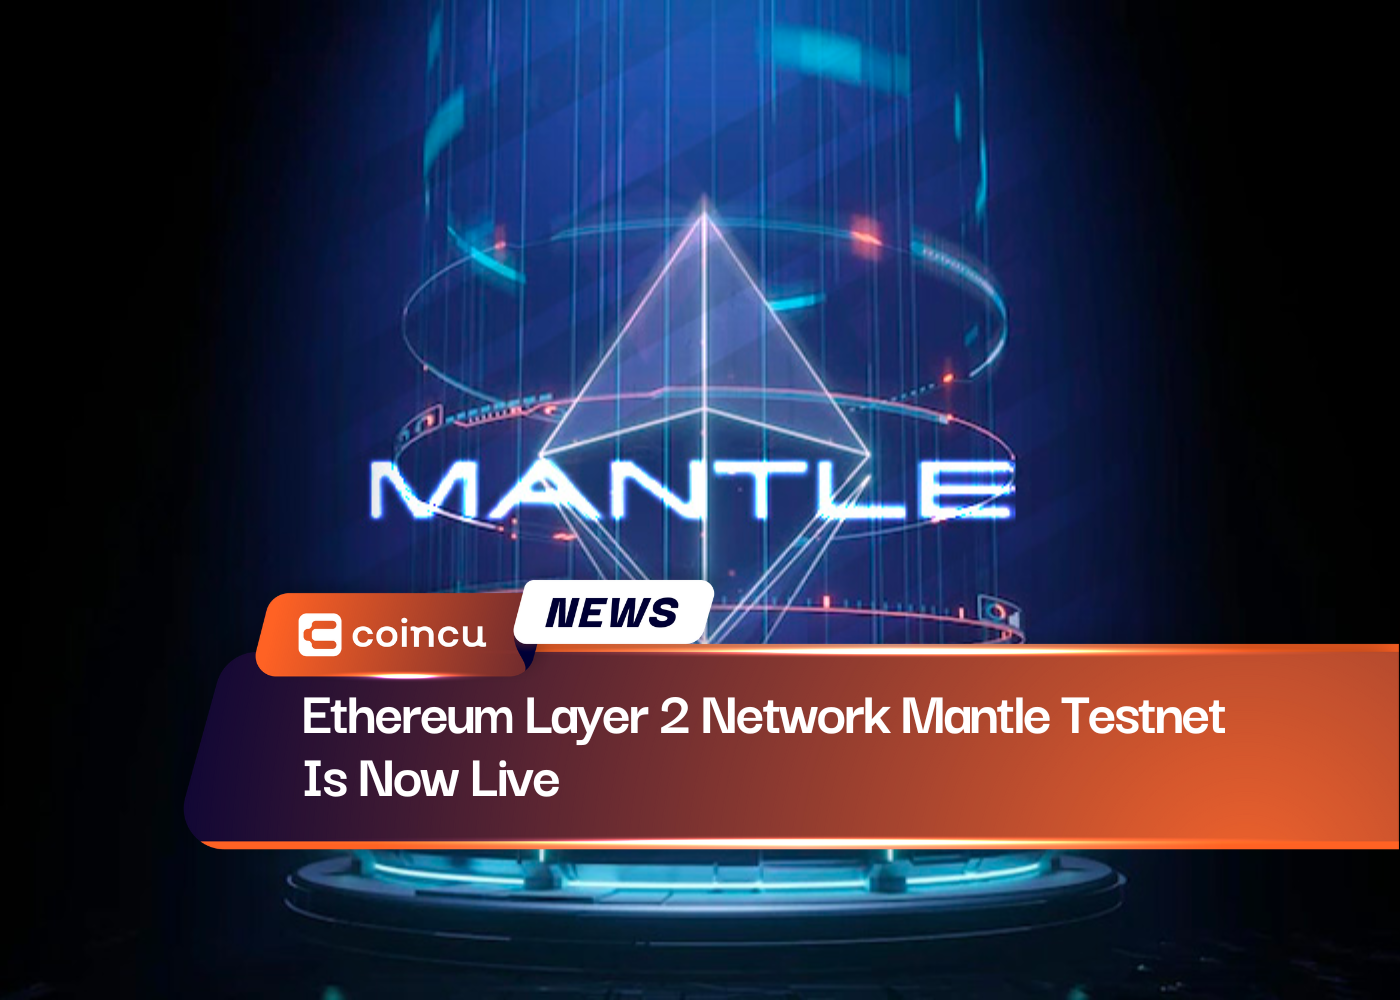 Ethereum Layer 2 Network Mantle Testnet Is Now Live